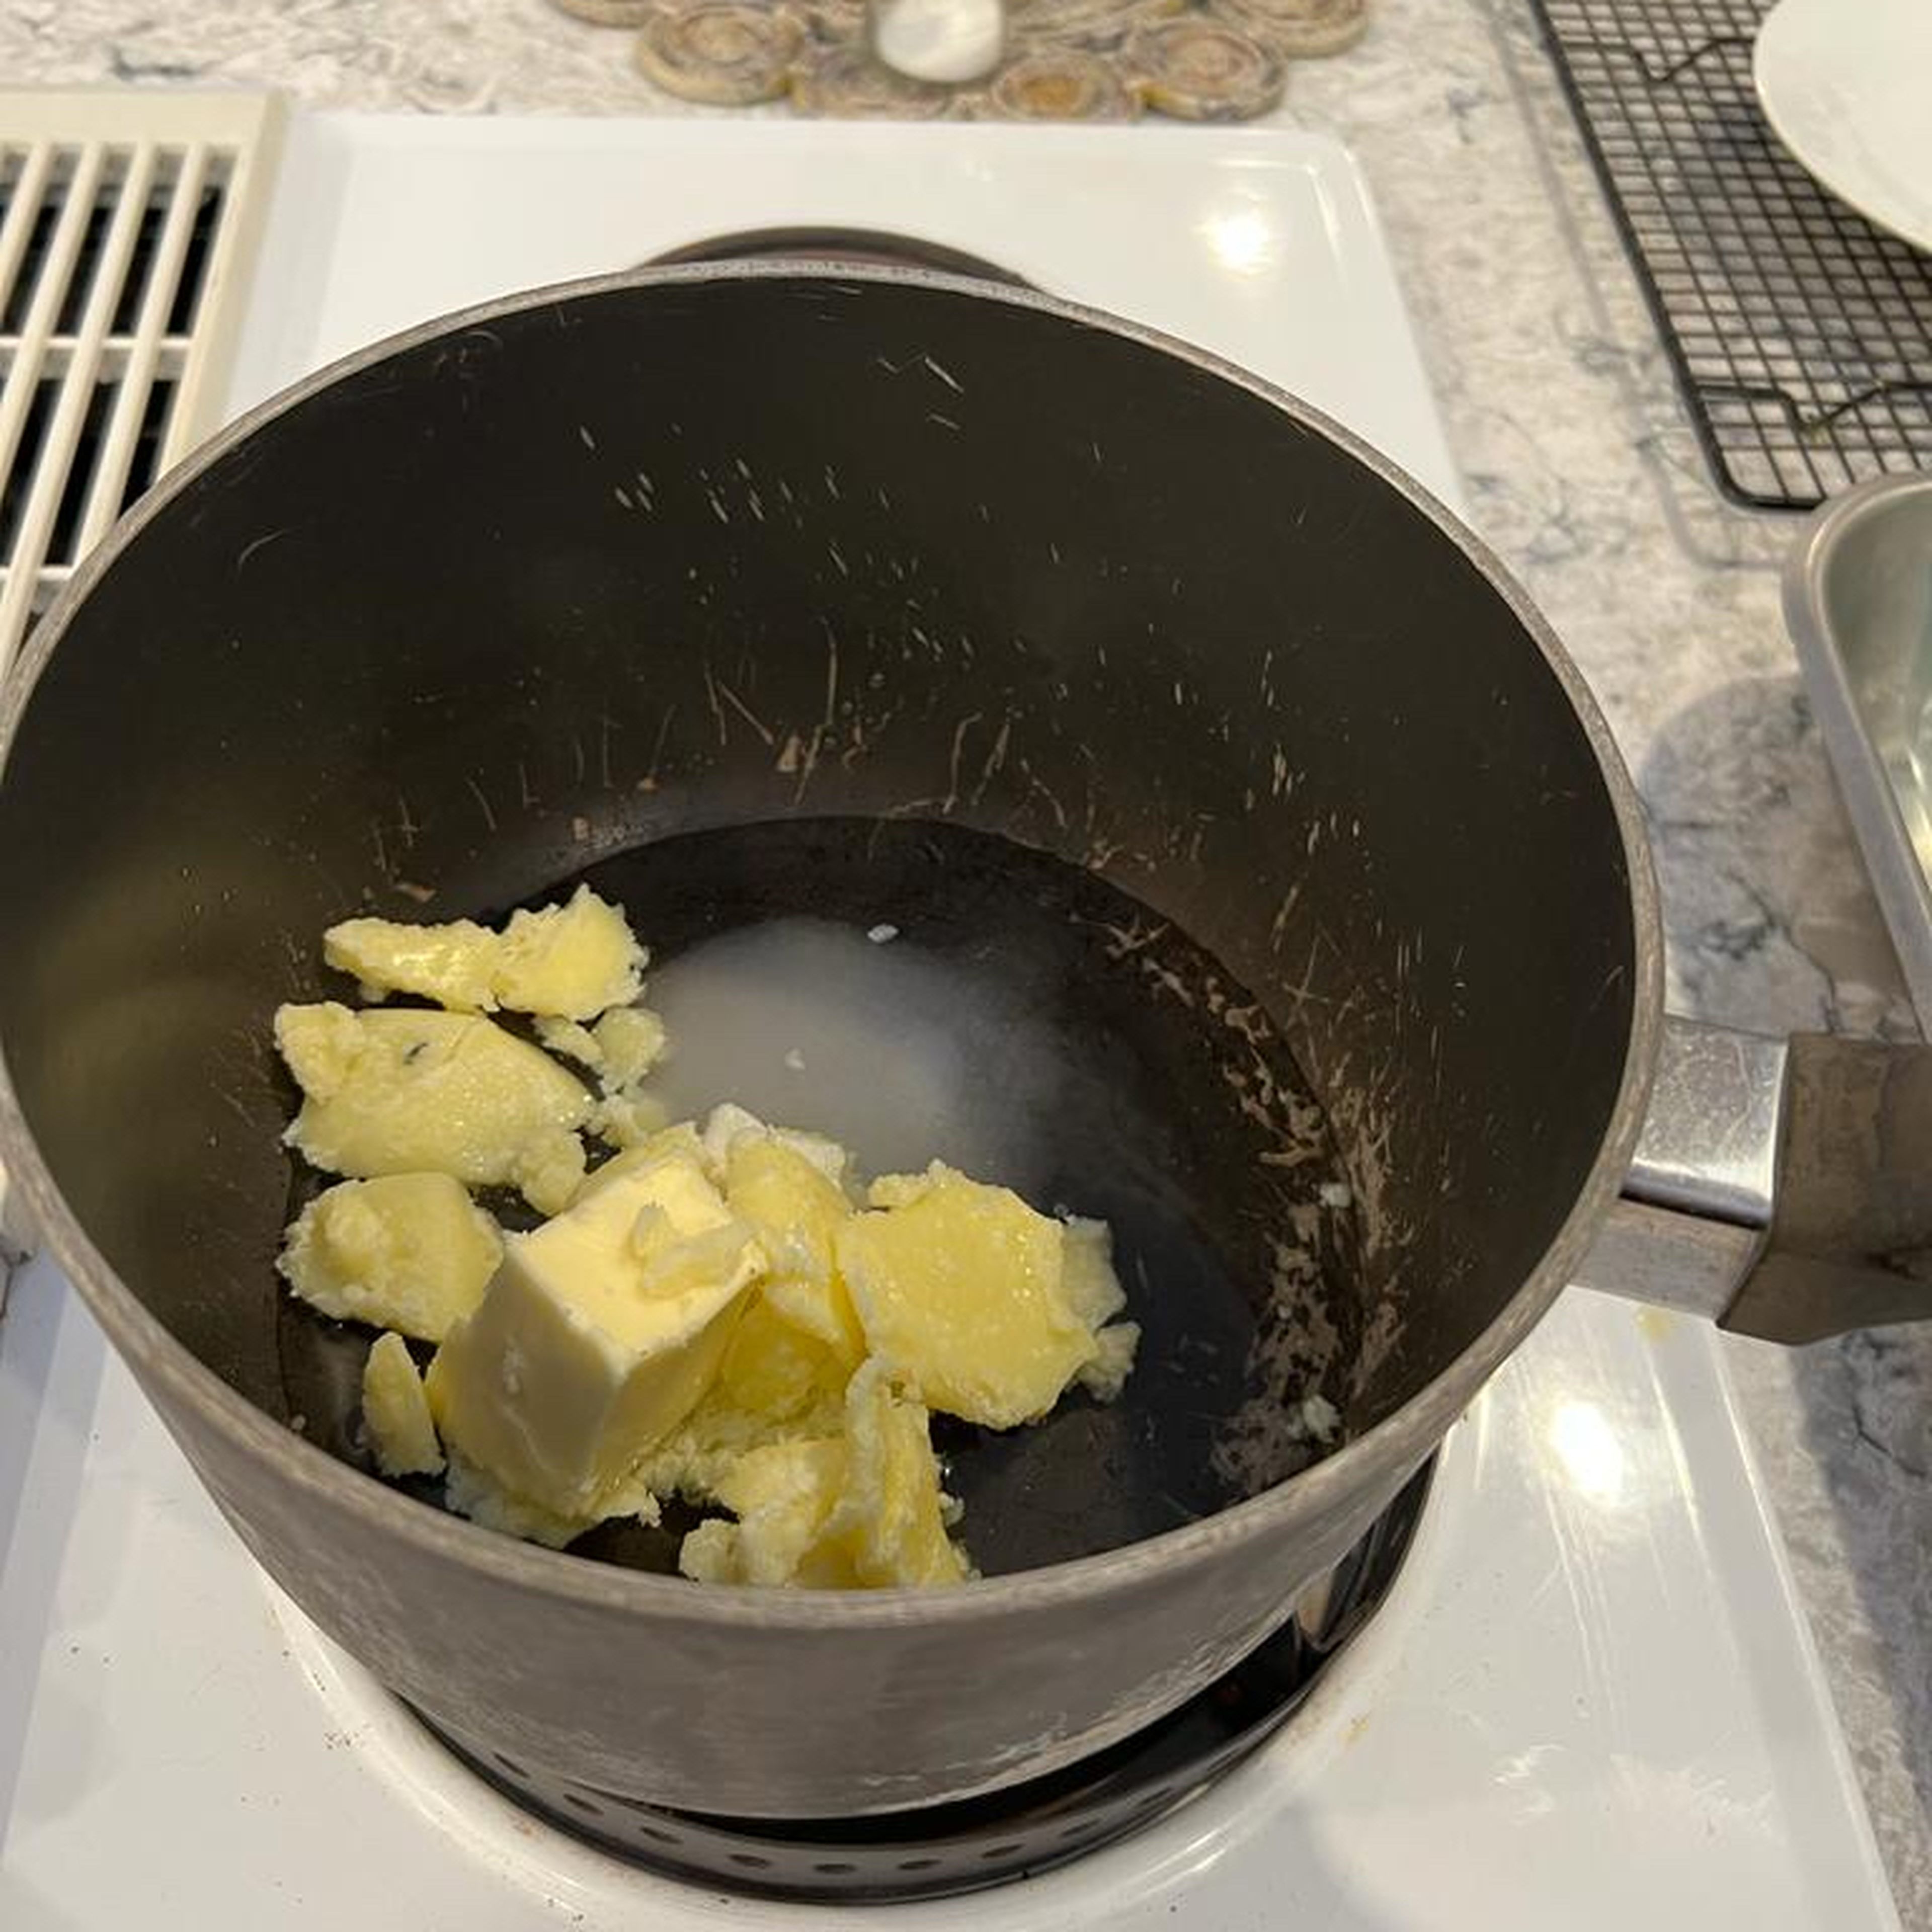 Melt butter, water, sugar, and salt in a saucepan until the water just starts to boil/bubble